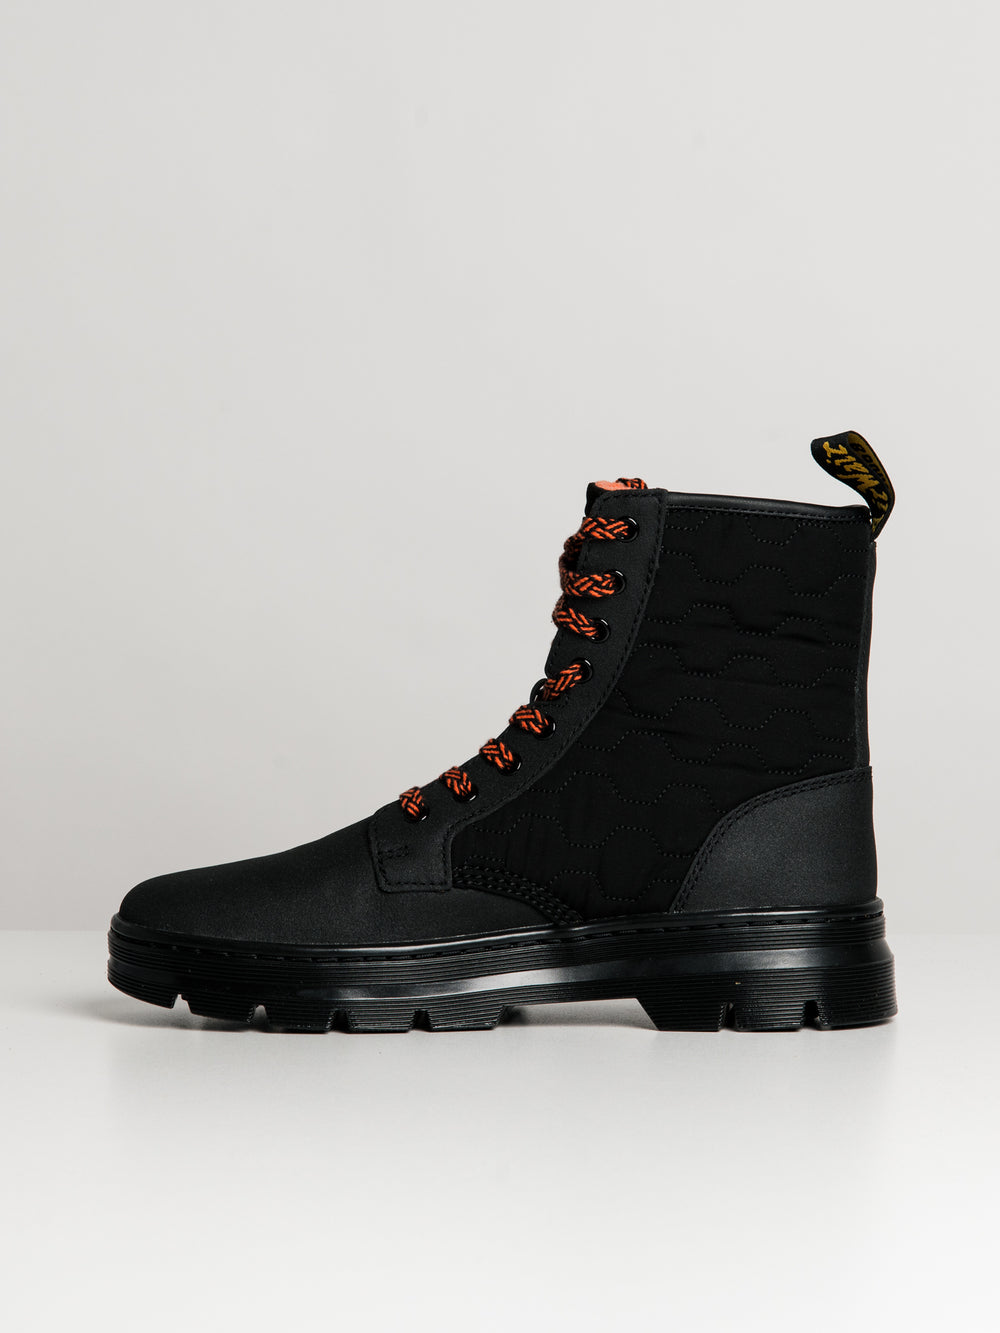 MENS DR MARTENS COMBS II DUAL ORG BOOT - CLEARANCE